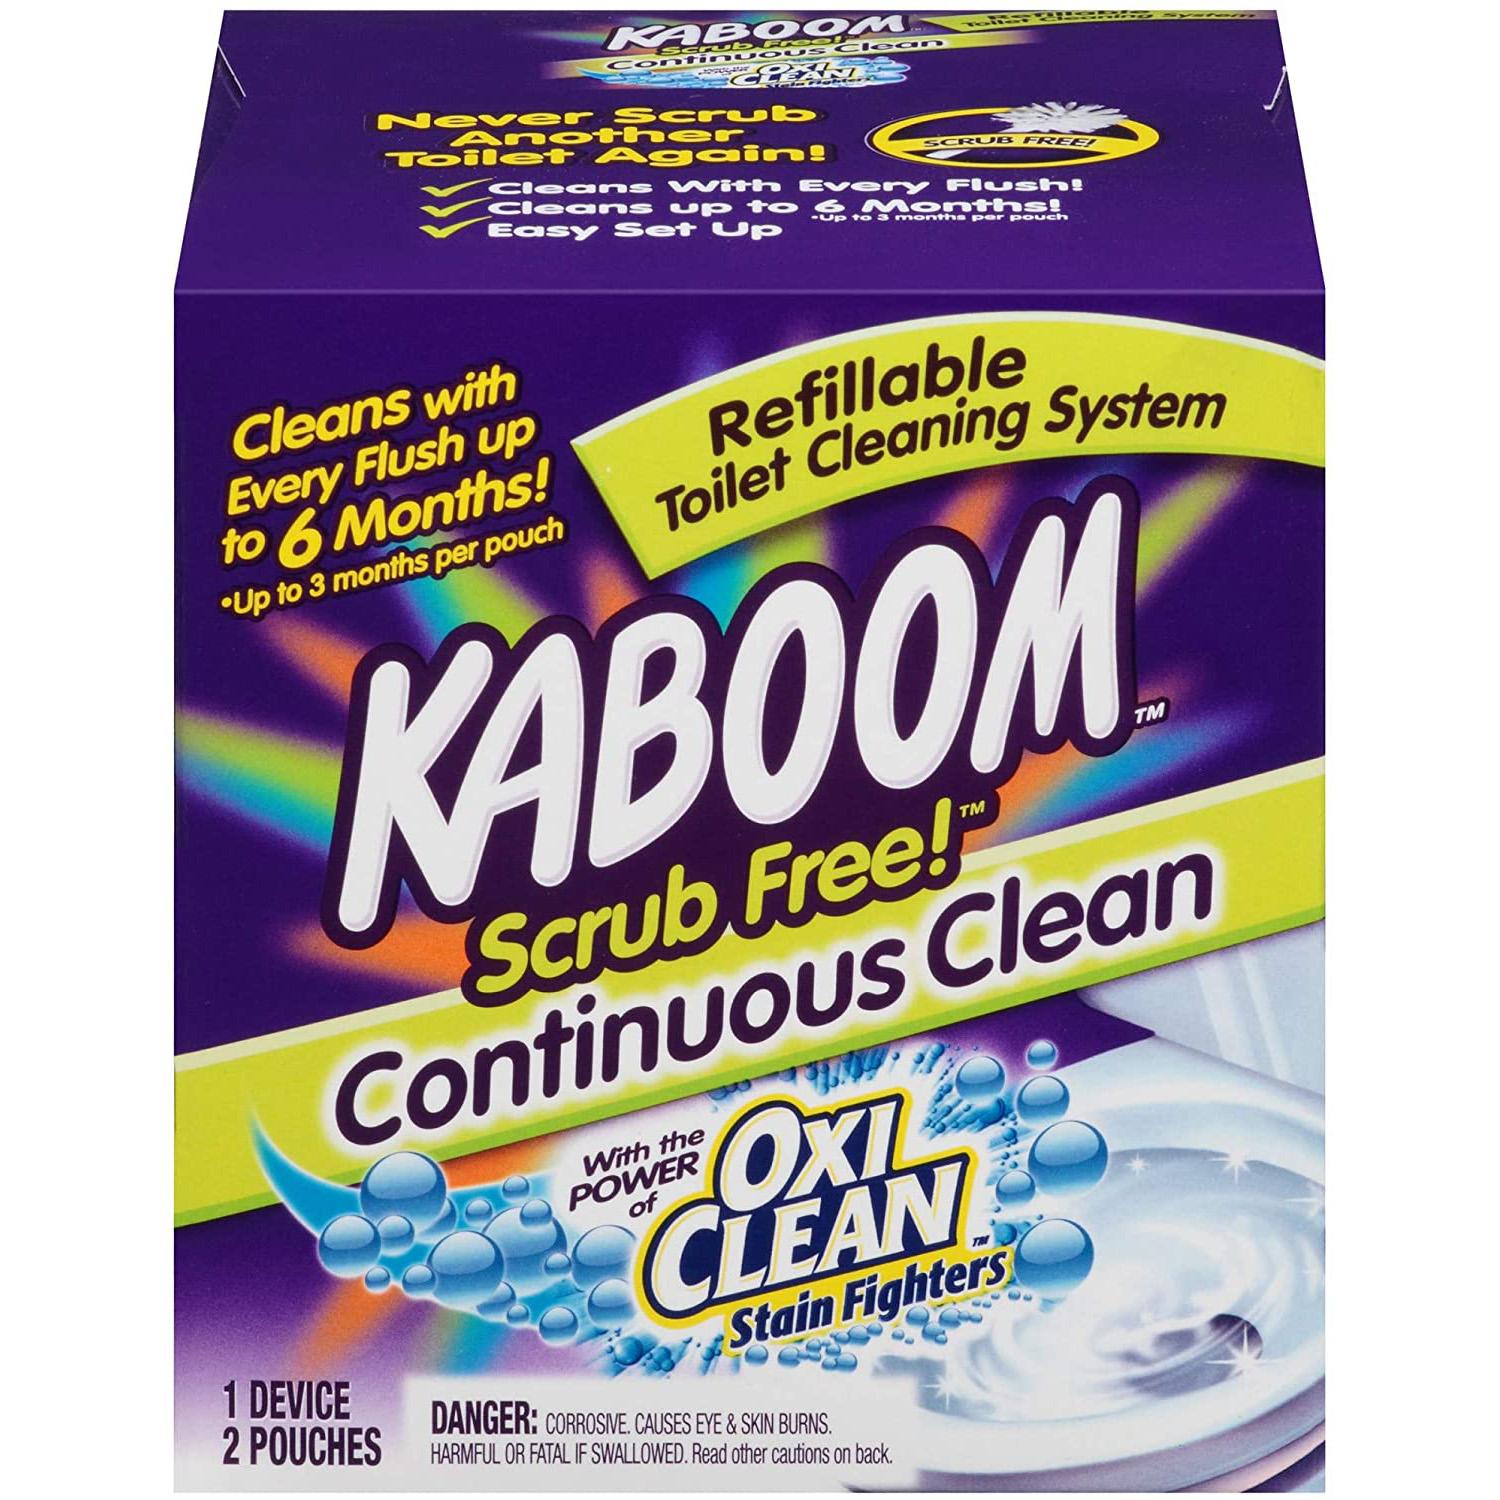 Kaboom Oxi Clean Toilet Bowl Cleaner System for $7.59 Shipped